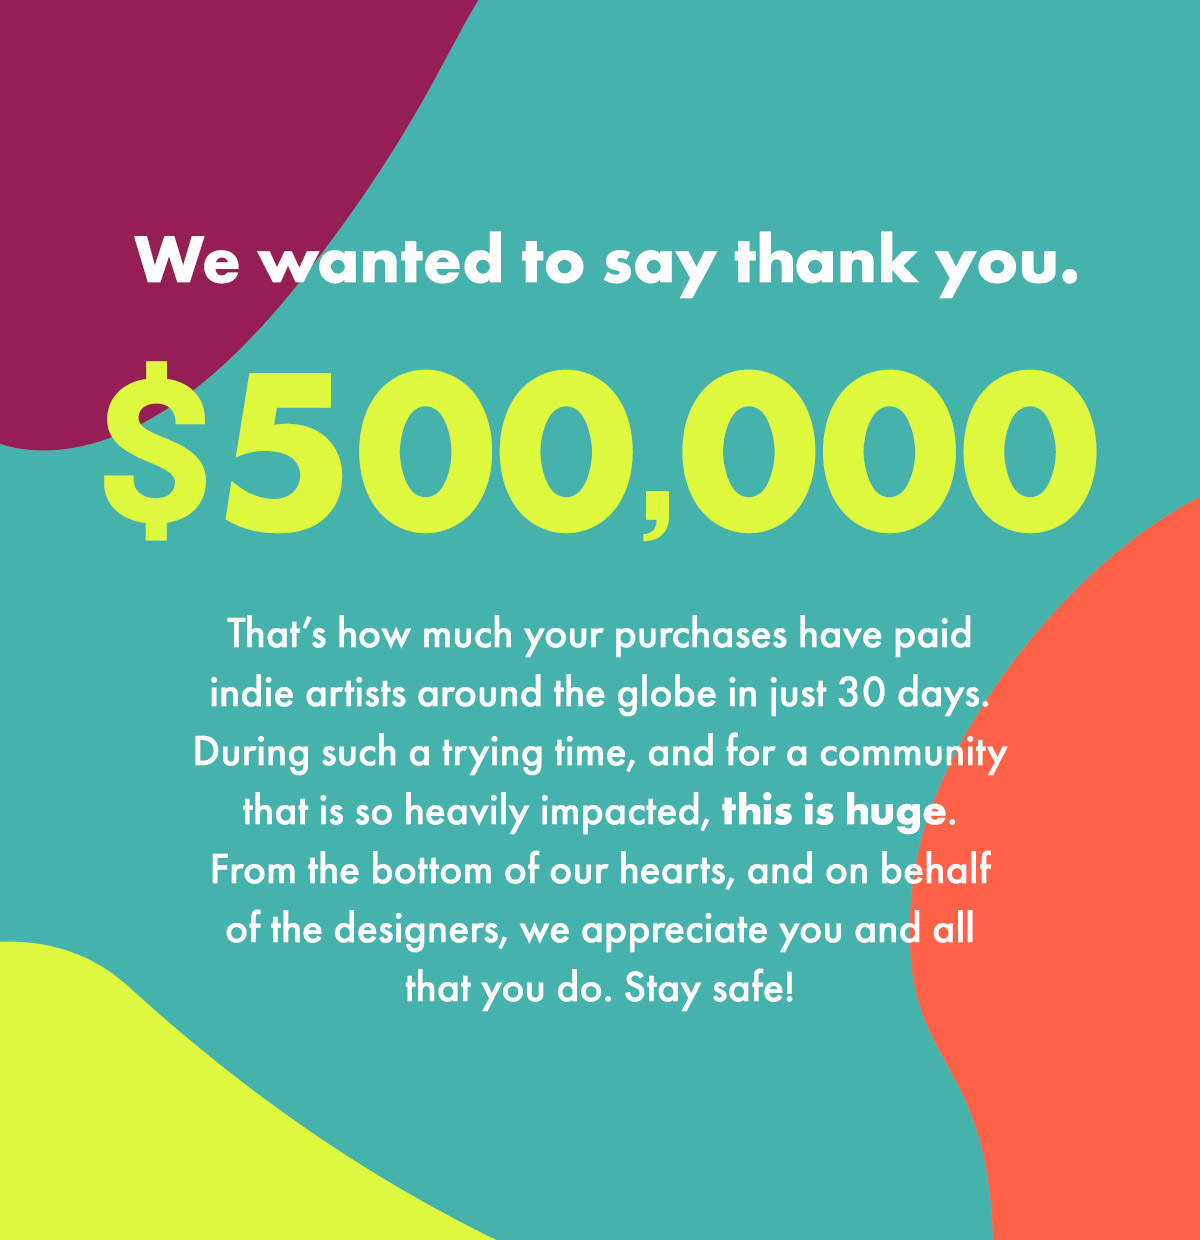 We wanted to say thank you. 500,000 dollars. That's how much your purchases have paid indie artists around the globe in just 30 days. During such a trying time, and for a community that is so heavily impacted, this is huge. From the bottom of our hearts, and on behalf of the designers, we appreciate you and all that you do. Stay safe!